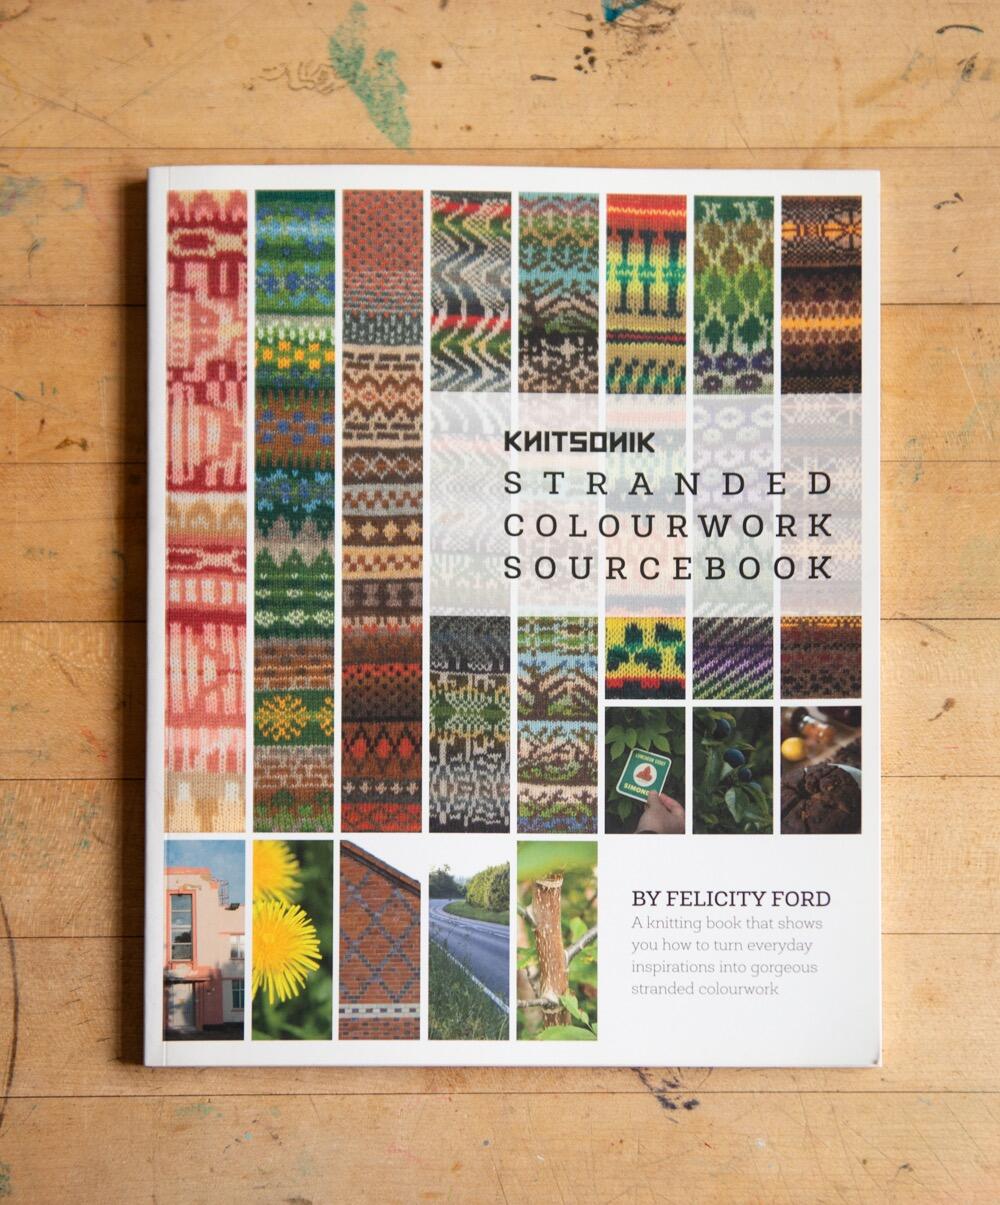 KNITSONIK Stranded Colourwork Sourcebook lying on a wooden table